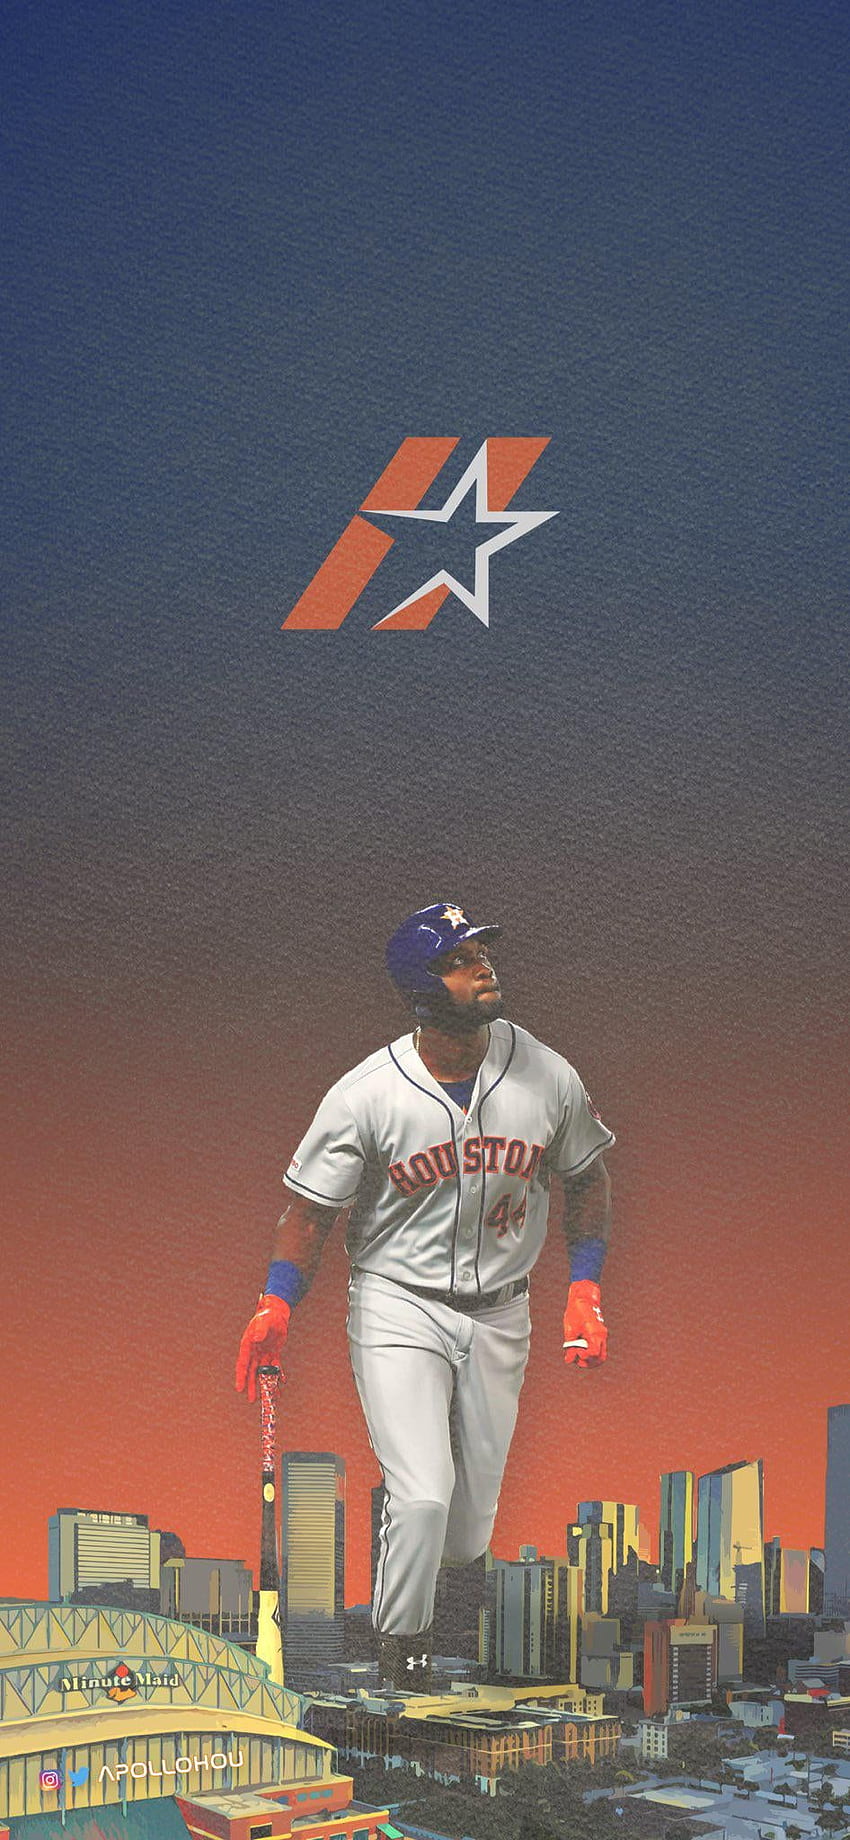 Download Houston Astros wallpaper by Chrisjm3  6486  Free on ZEDGE now  Browse millions of popular astros Wa  Mlb wallpaper Baseball wallpaper  Houston astros